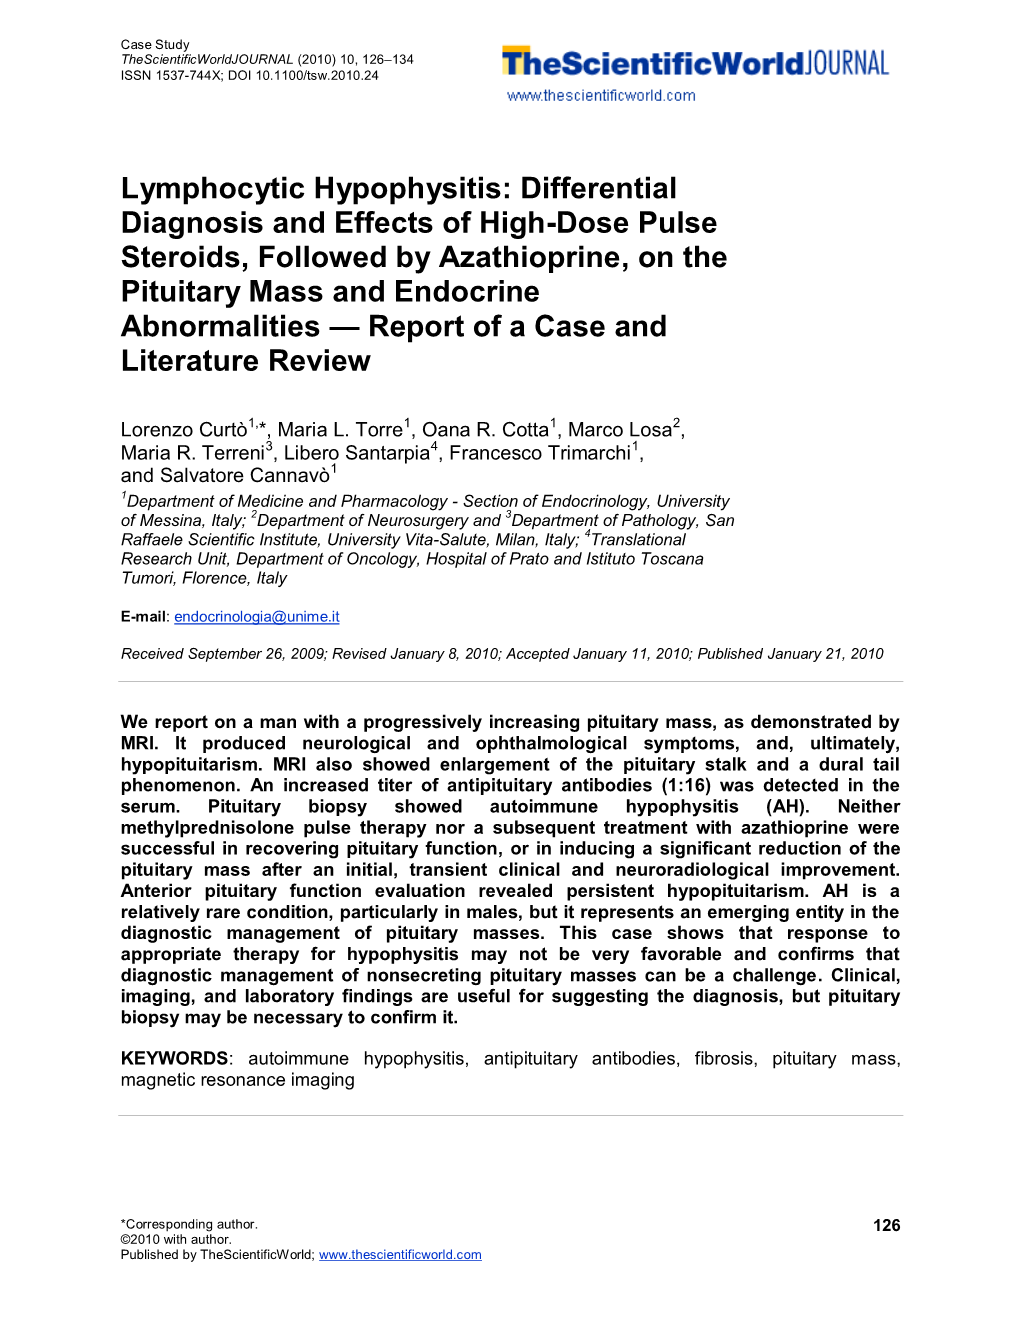 Lymphocytic Hypophysitis: Differential Diagnosis and Effects of High-Dose